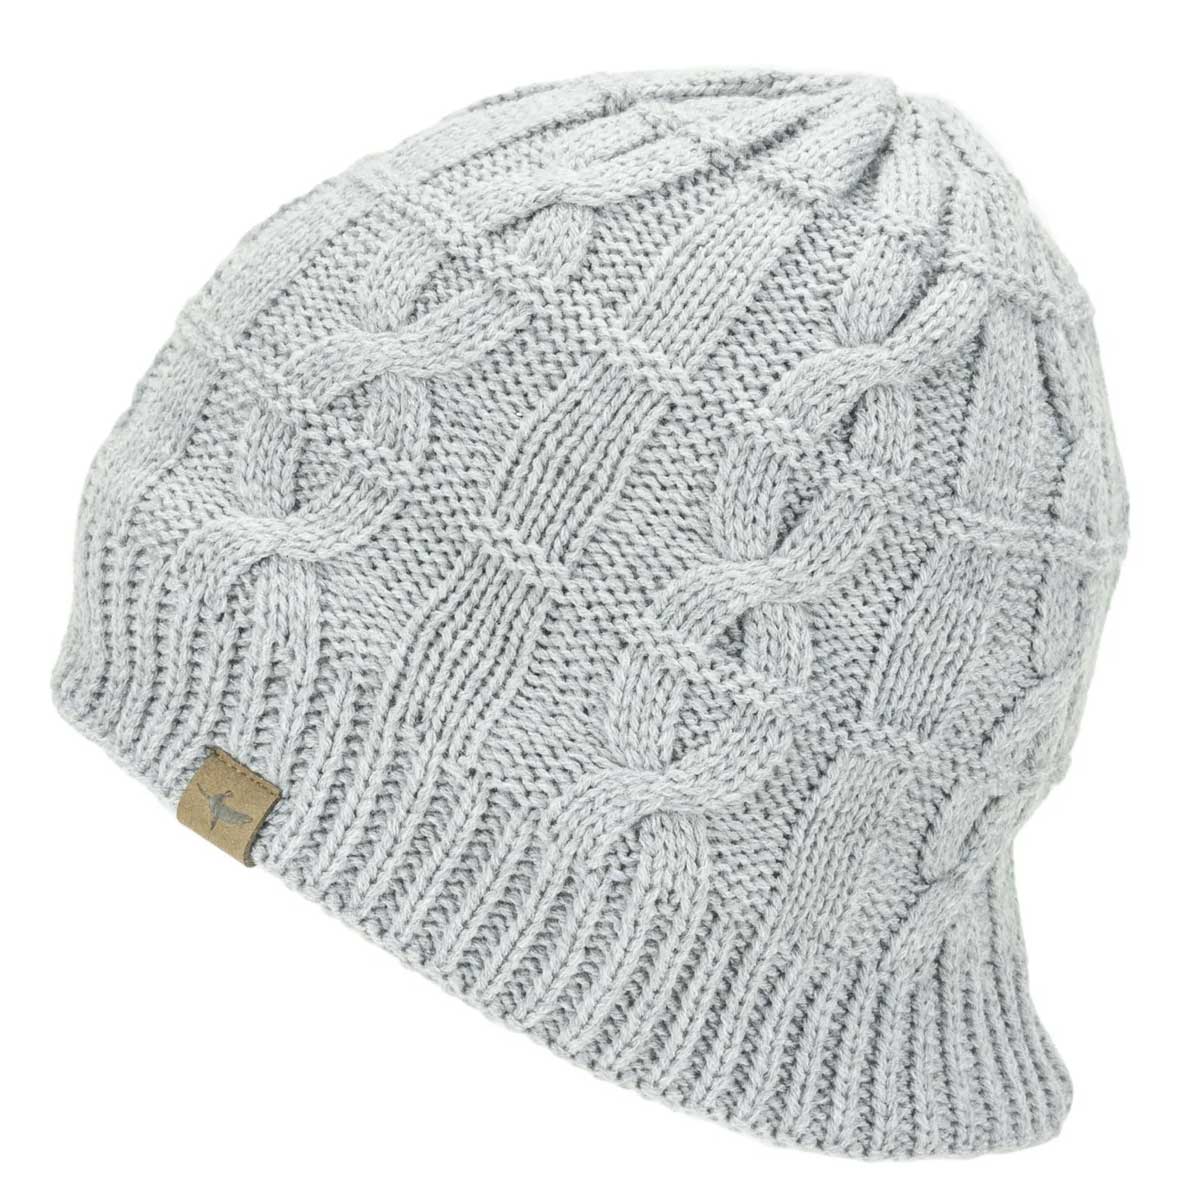 SEALSKINZ Hat - Waterproof Cold Weather Cable Knit Beanie Hat - Grey